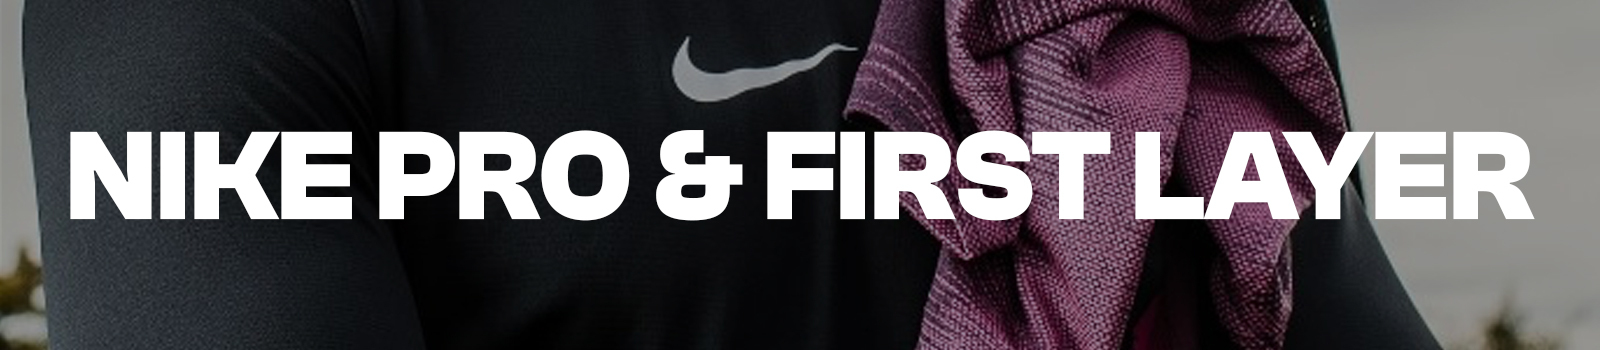 Nike Pro & First Layer